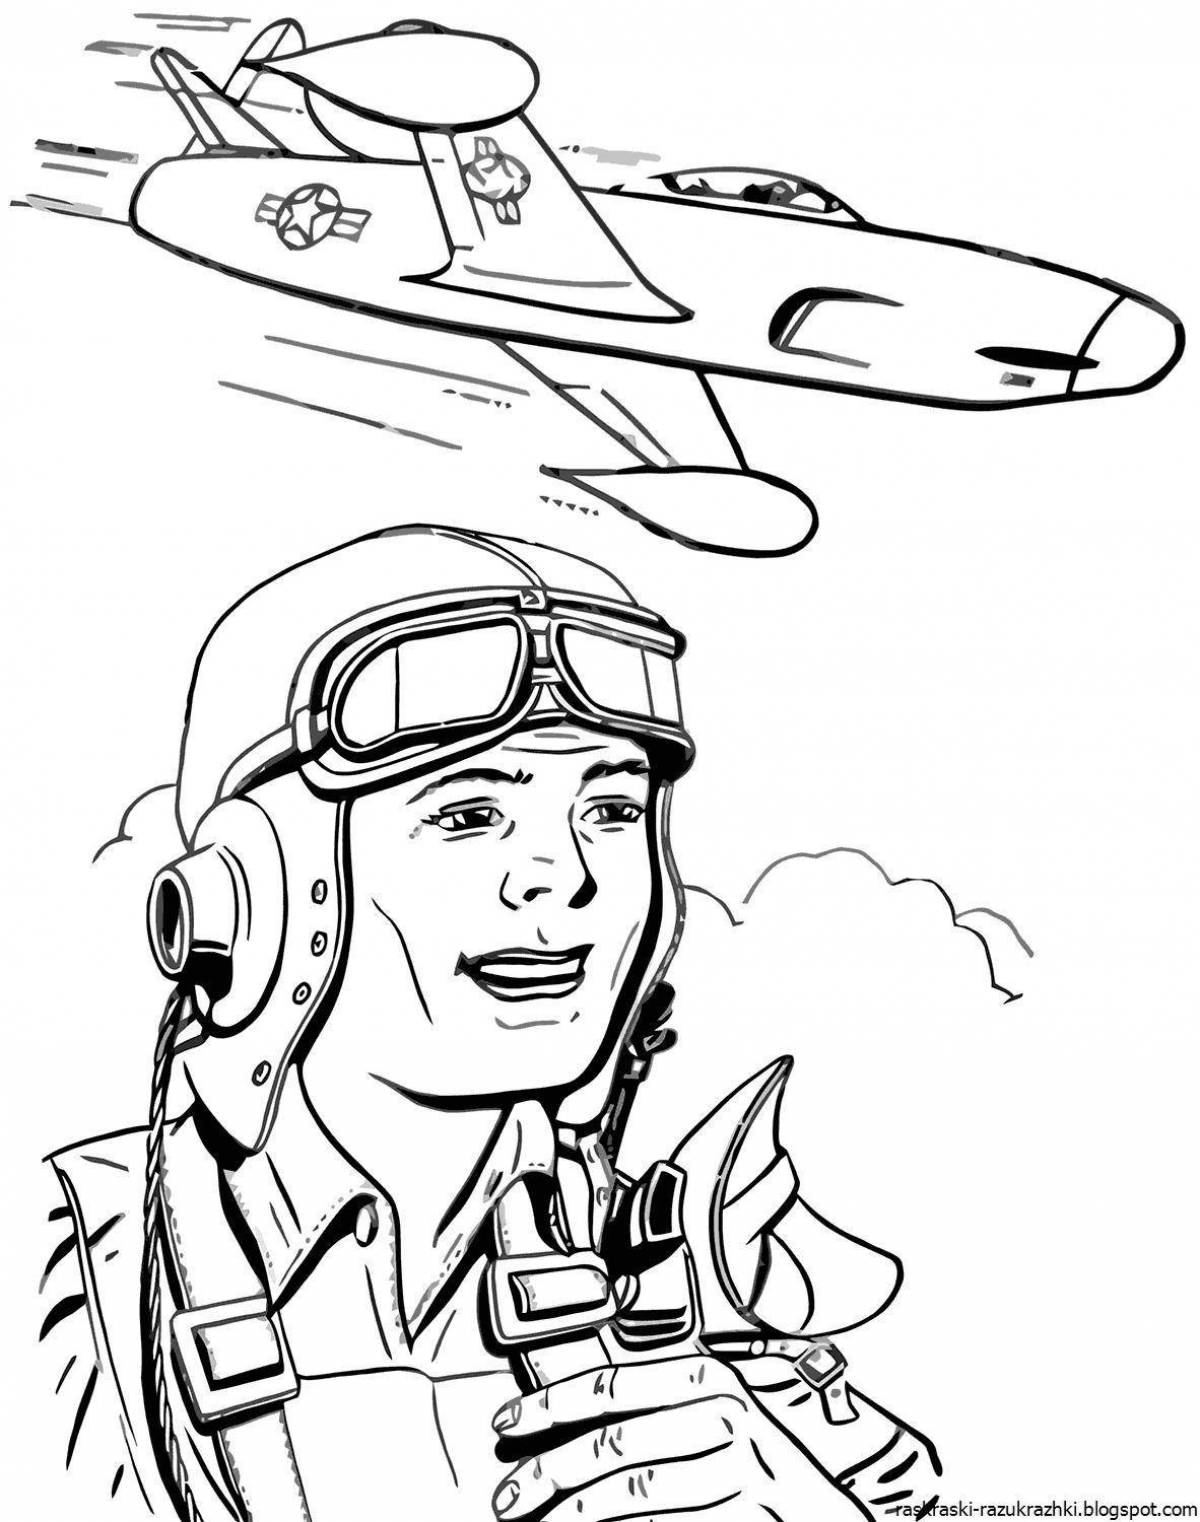 Exquisite military pilot coloring pages for kids